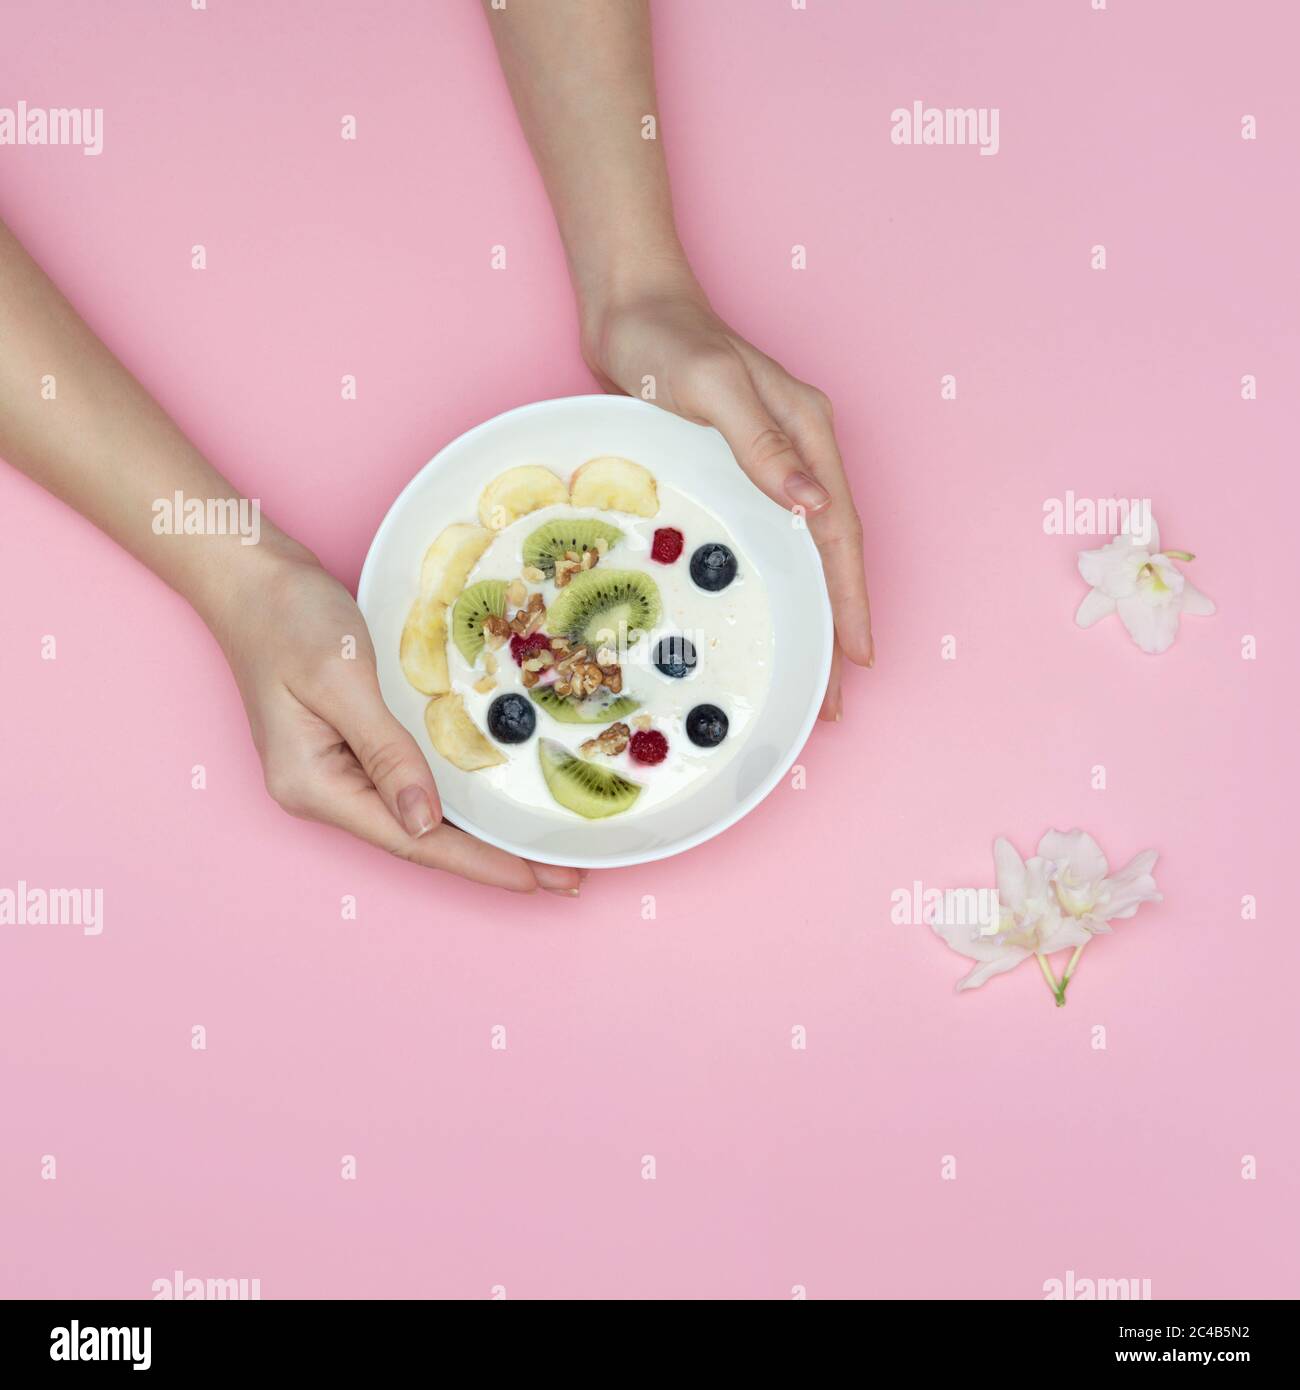 Female hands holding a bowl of smoothies with superfoods. Yogurt. blueberries, kiwi, almonds, banana, nuts. Top view on a pink background. Stock Photo